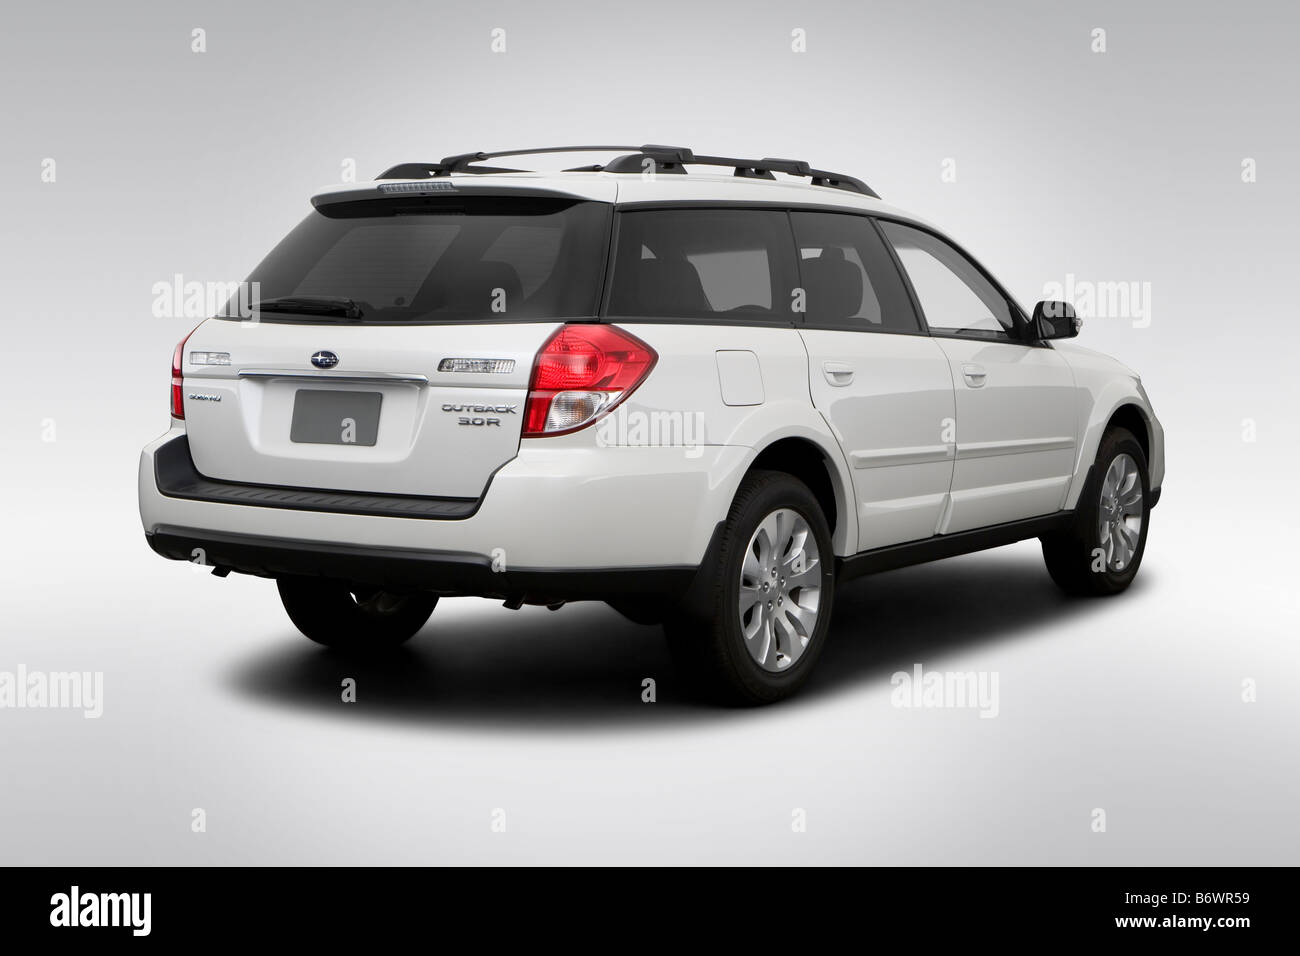 2009 Subaru Outback 3.0 R Limited in White - Rear angle view Stock Photo -  Alamy